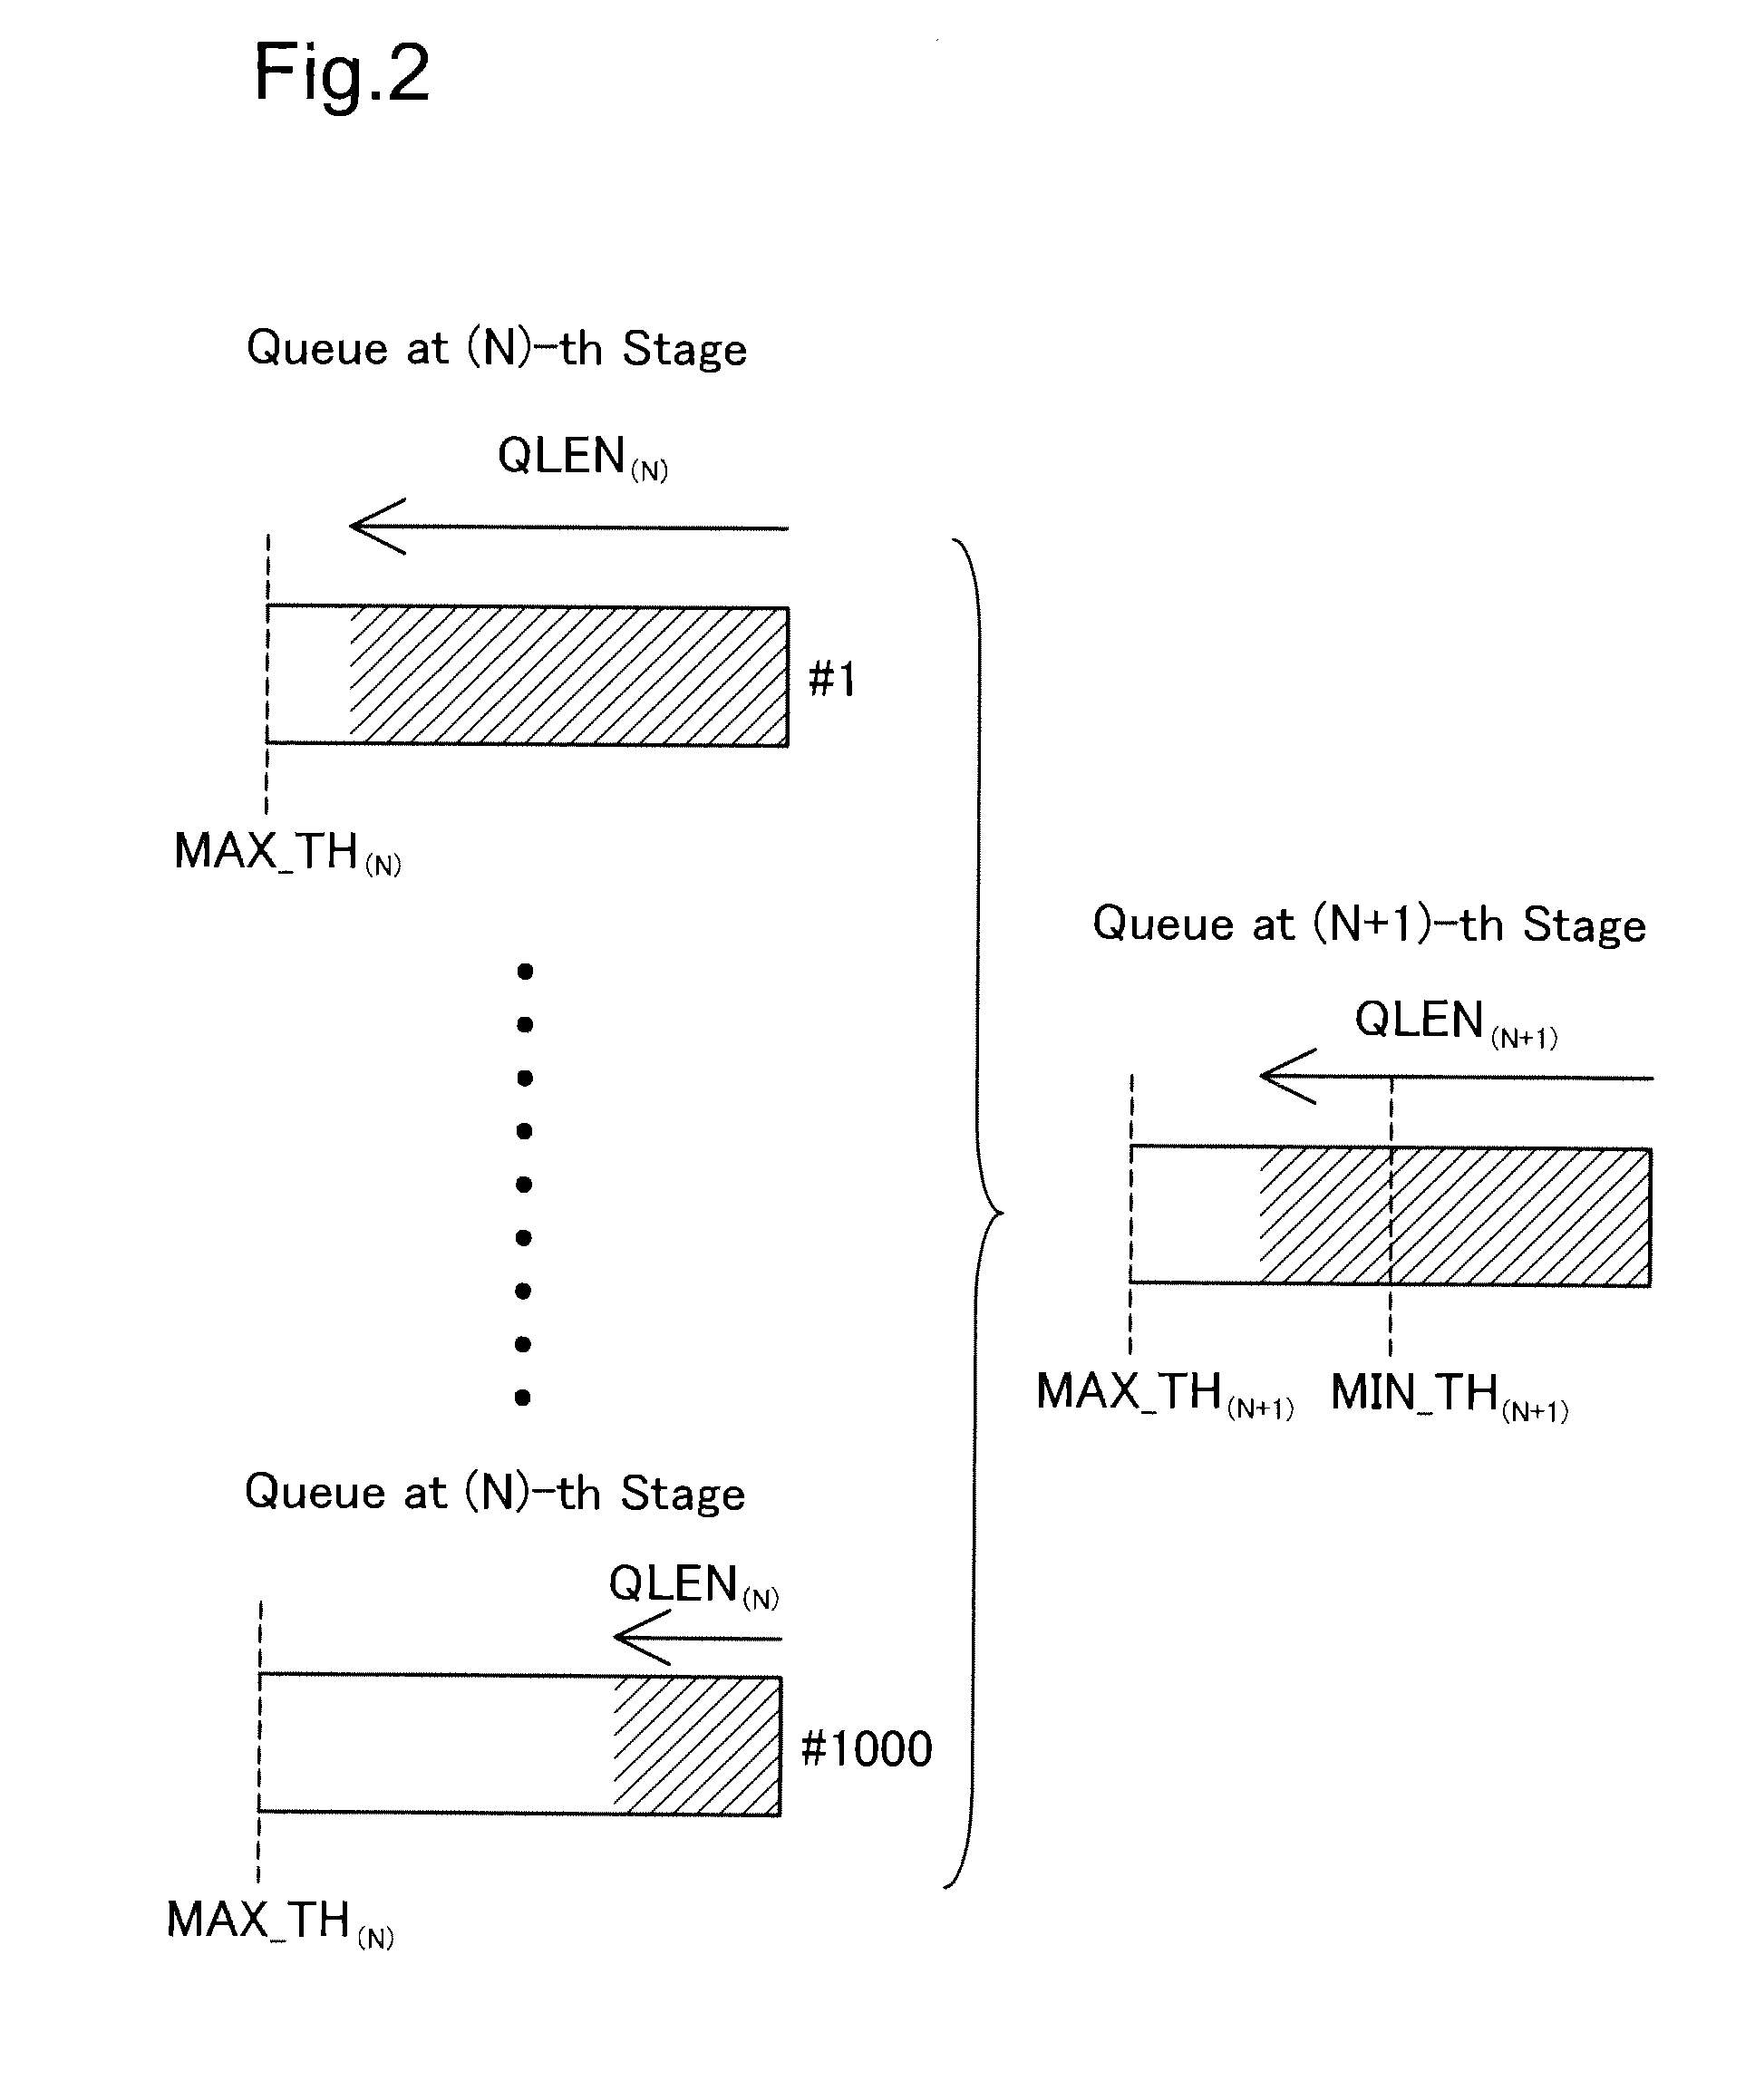 Packet relay apparatus and method of relaying packet